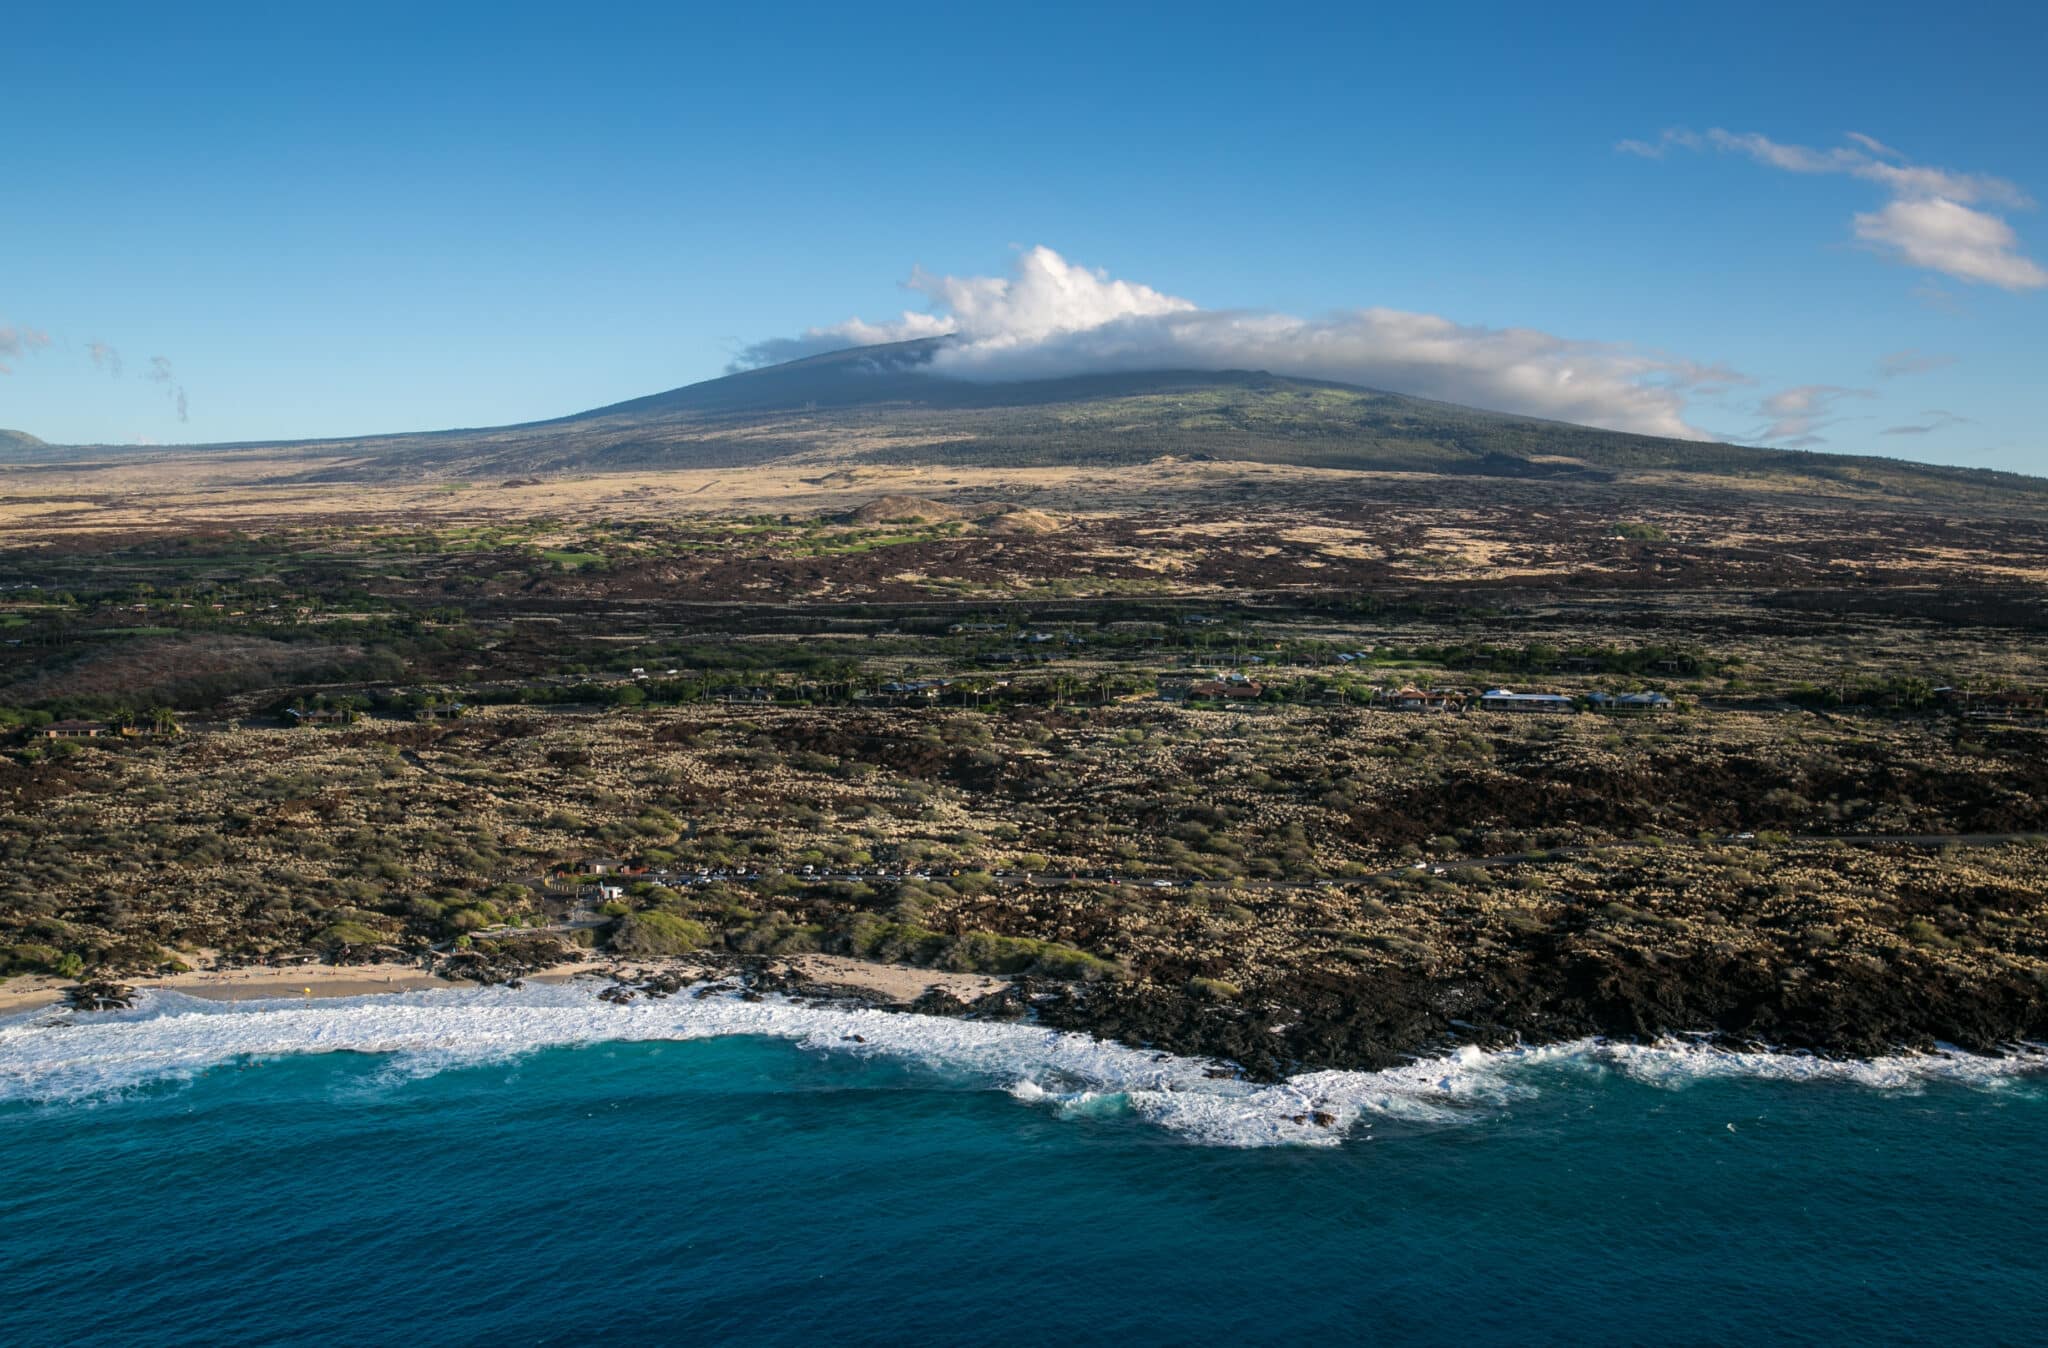 KONA COAST, HI - DECEMBER 16:  A nearly deserted beach at the edge on an old Mauna Loa lava flow is viewed on December 16, 2016, in this aerial photo taken along the Kona Kohala Coast, Hawaii. Hawaii, the largest of all the Hawaiian Islands at 4,000 square miles, features active volcanoes, large cattle ranches, unusual flora and fauna, waterfalls, rainforests, and occasionally, snowcapped mountains. (Photo by George Rose/Getty Images)